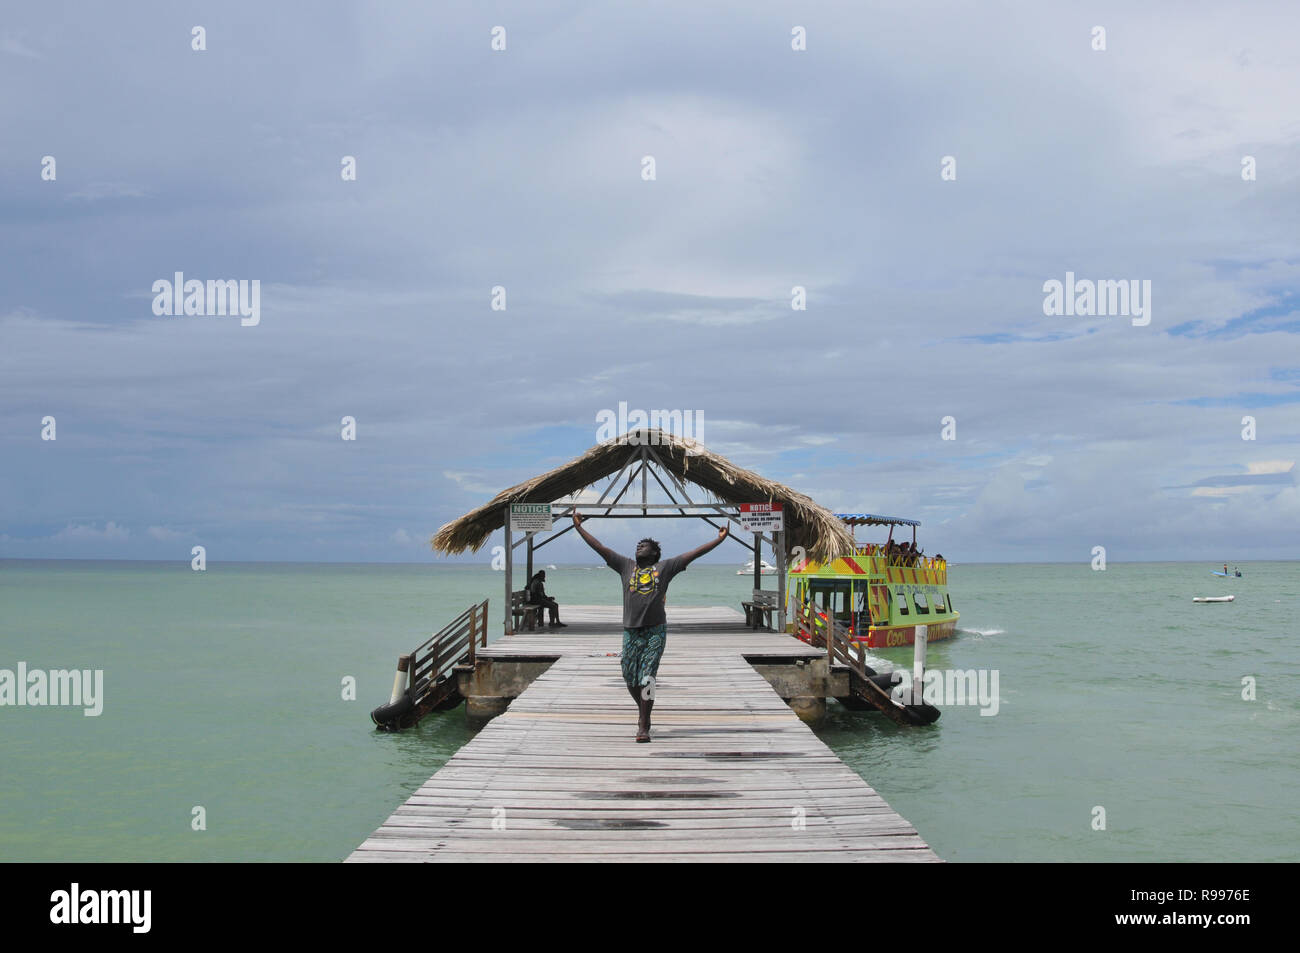 A jovial man dancing with raised arms in awe-inspiring spirits on wooden jetty after getting off a tour boat and expressing wonderful feelings of joy. Stock Photo